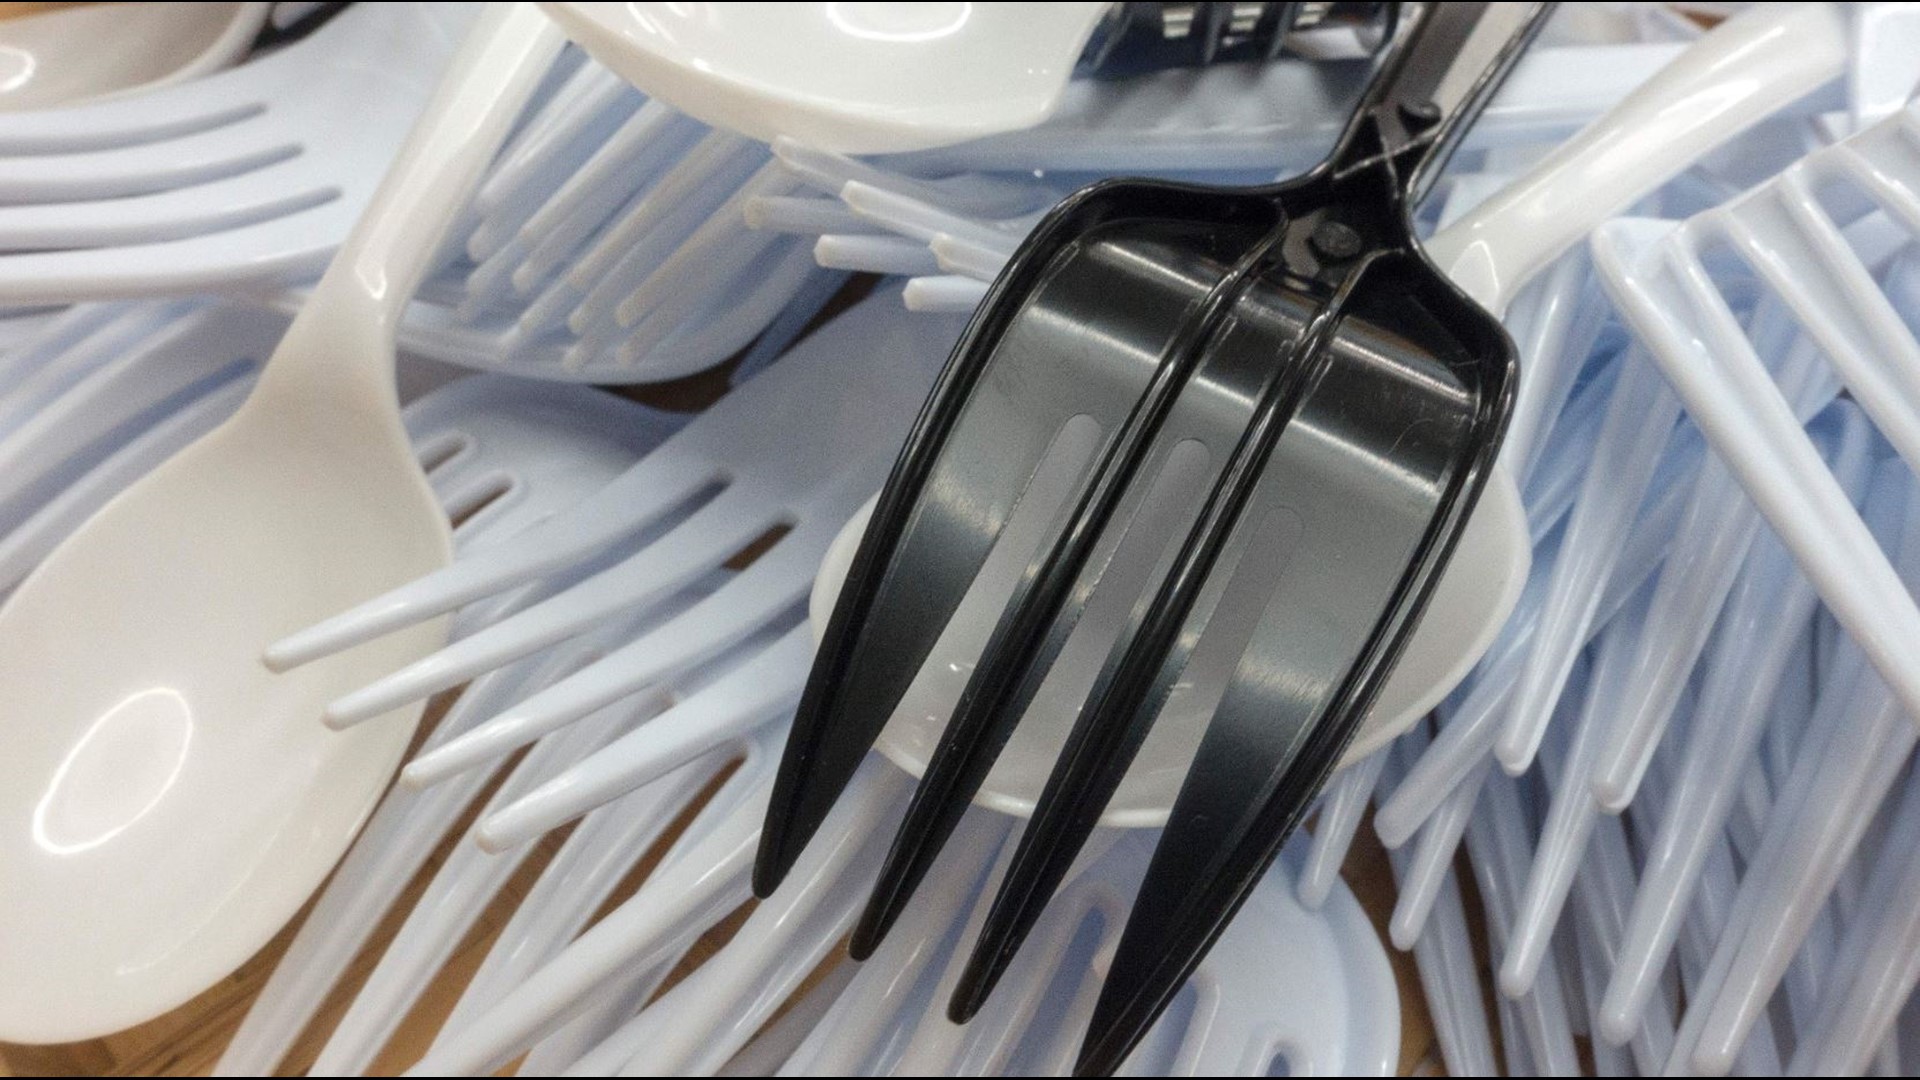 As of January 1, 2022, Washington restaurants will no longer include single use plastic utensils, straws or condiment packets. Diners may still request them.